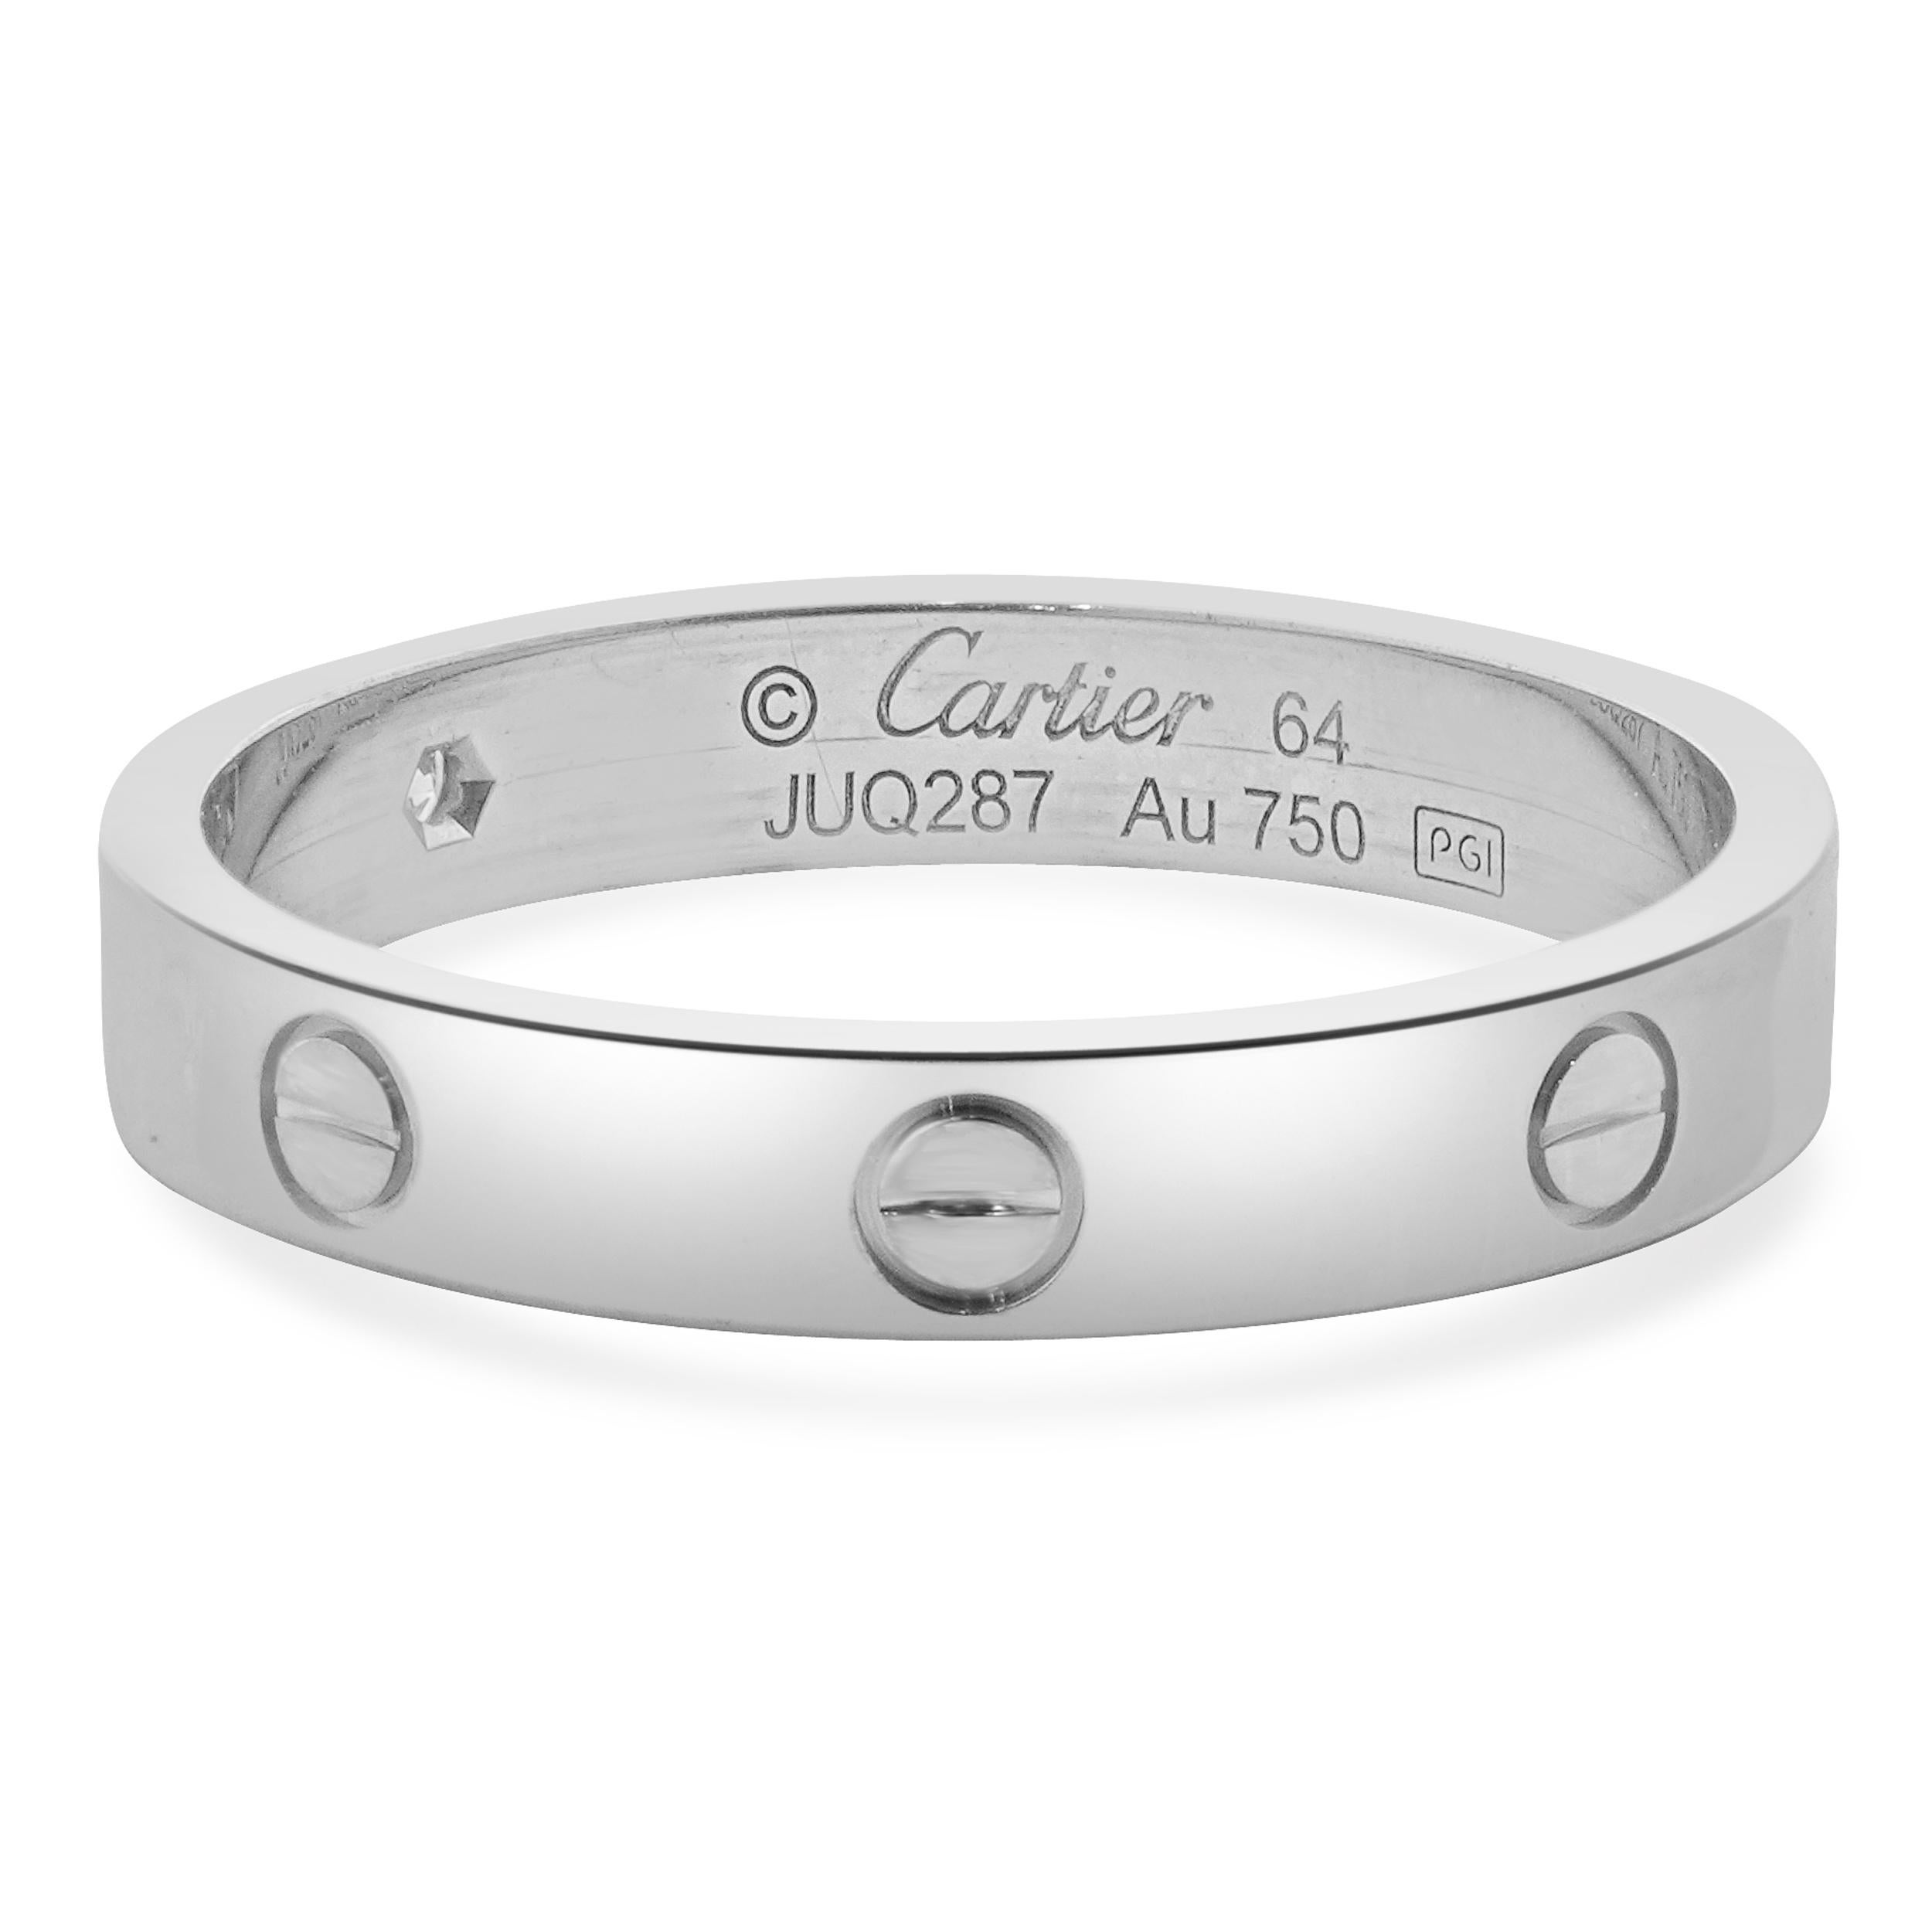 Cartier 18 Karat White Gold Single Diamond Love Band In Excellent Condition For Sale In Scottsdale, AZ